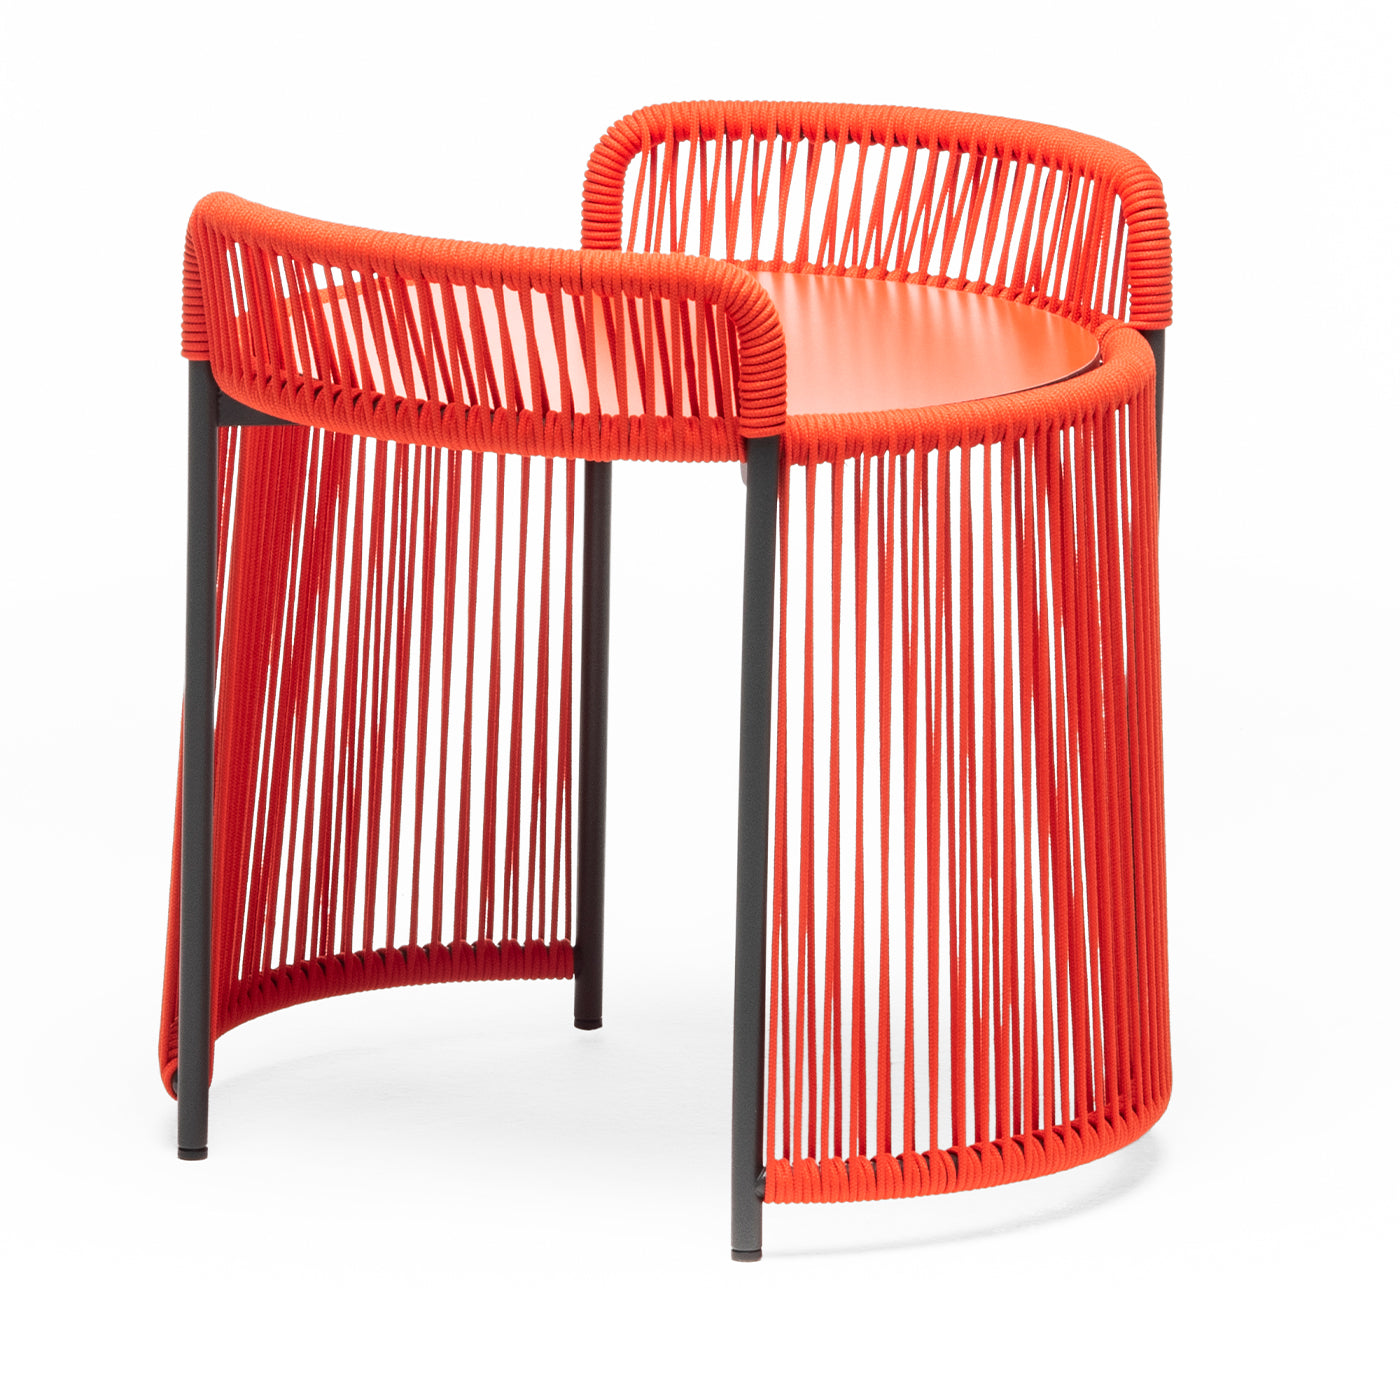 Altana Small Round Red Coffee Table by Antonio De Marco - Alternative view 1